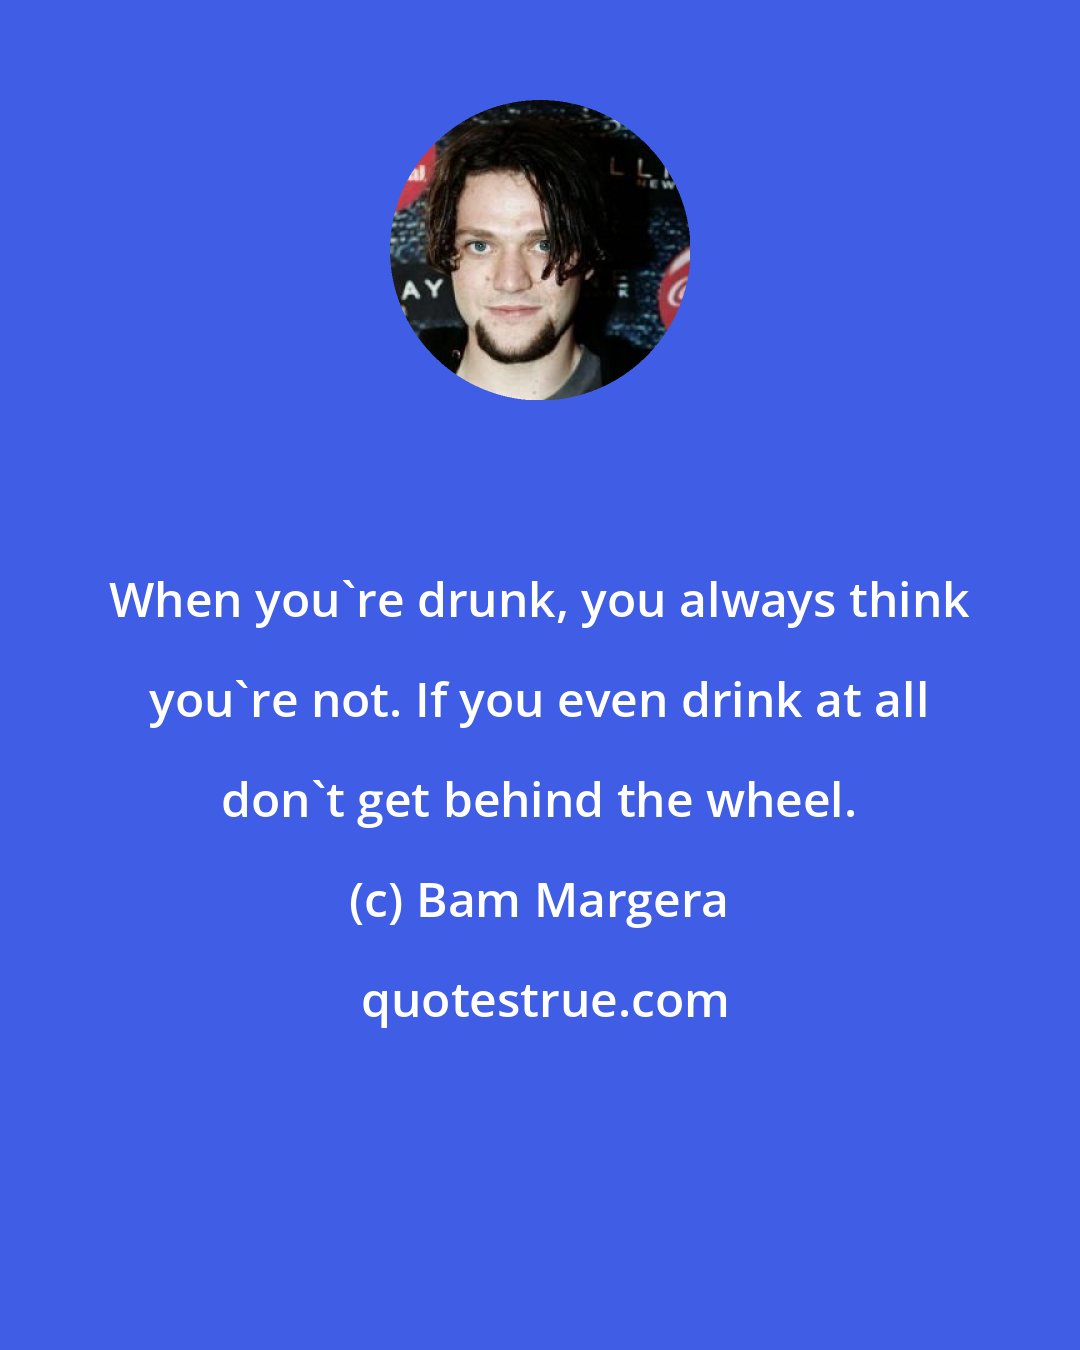 Bam Margera: When you're drunk, you always think you're not. If you even drink at all don't get behind the wheel.